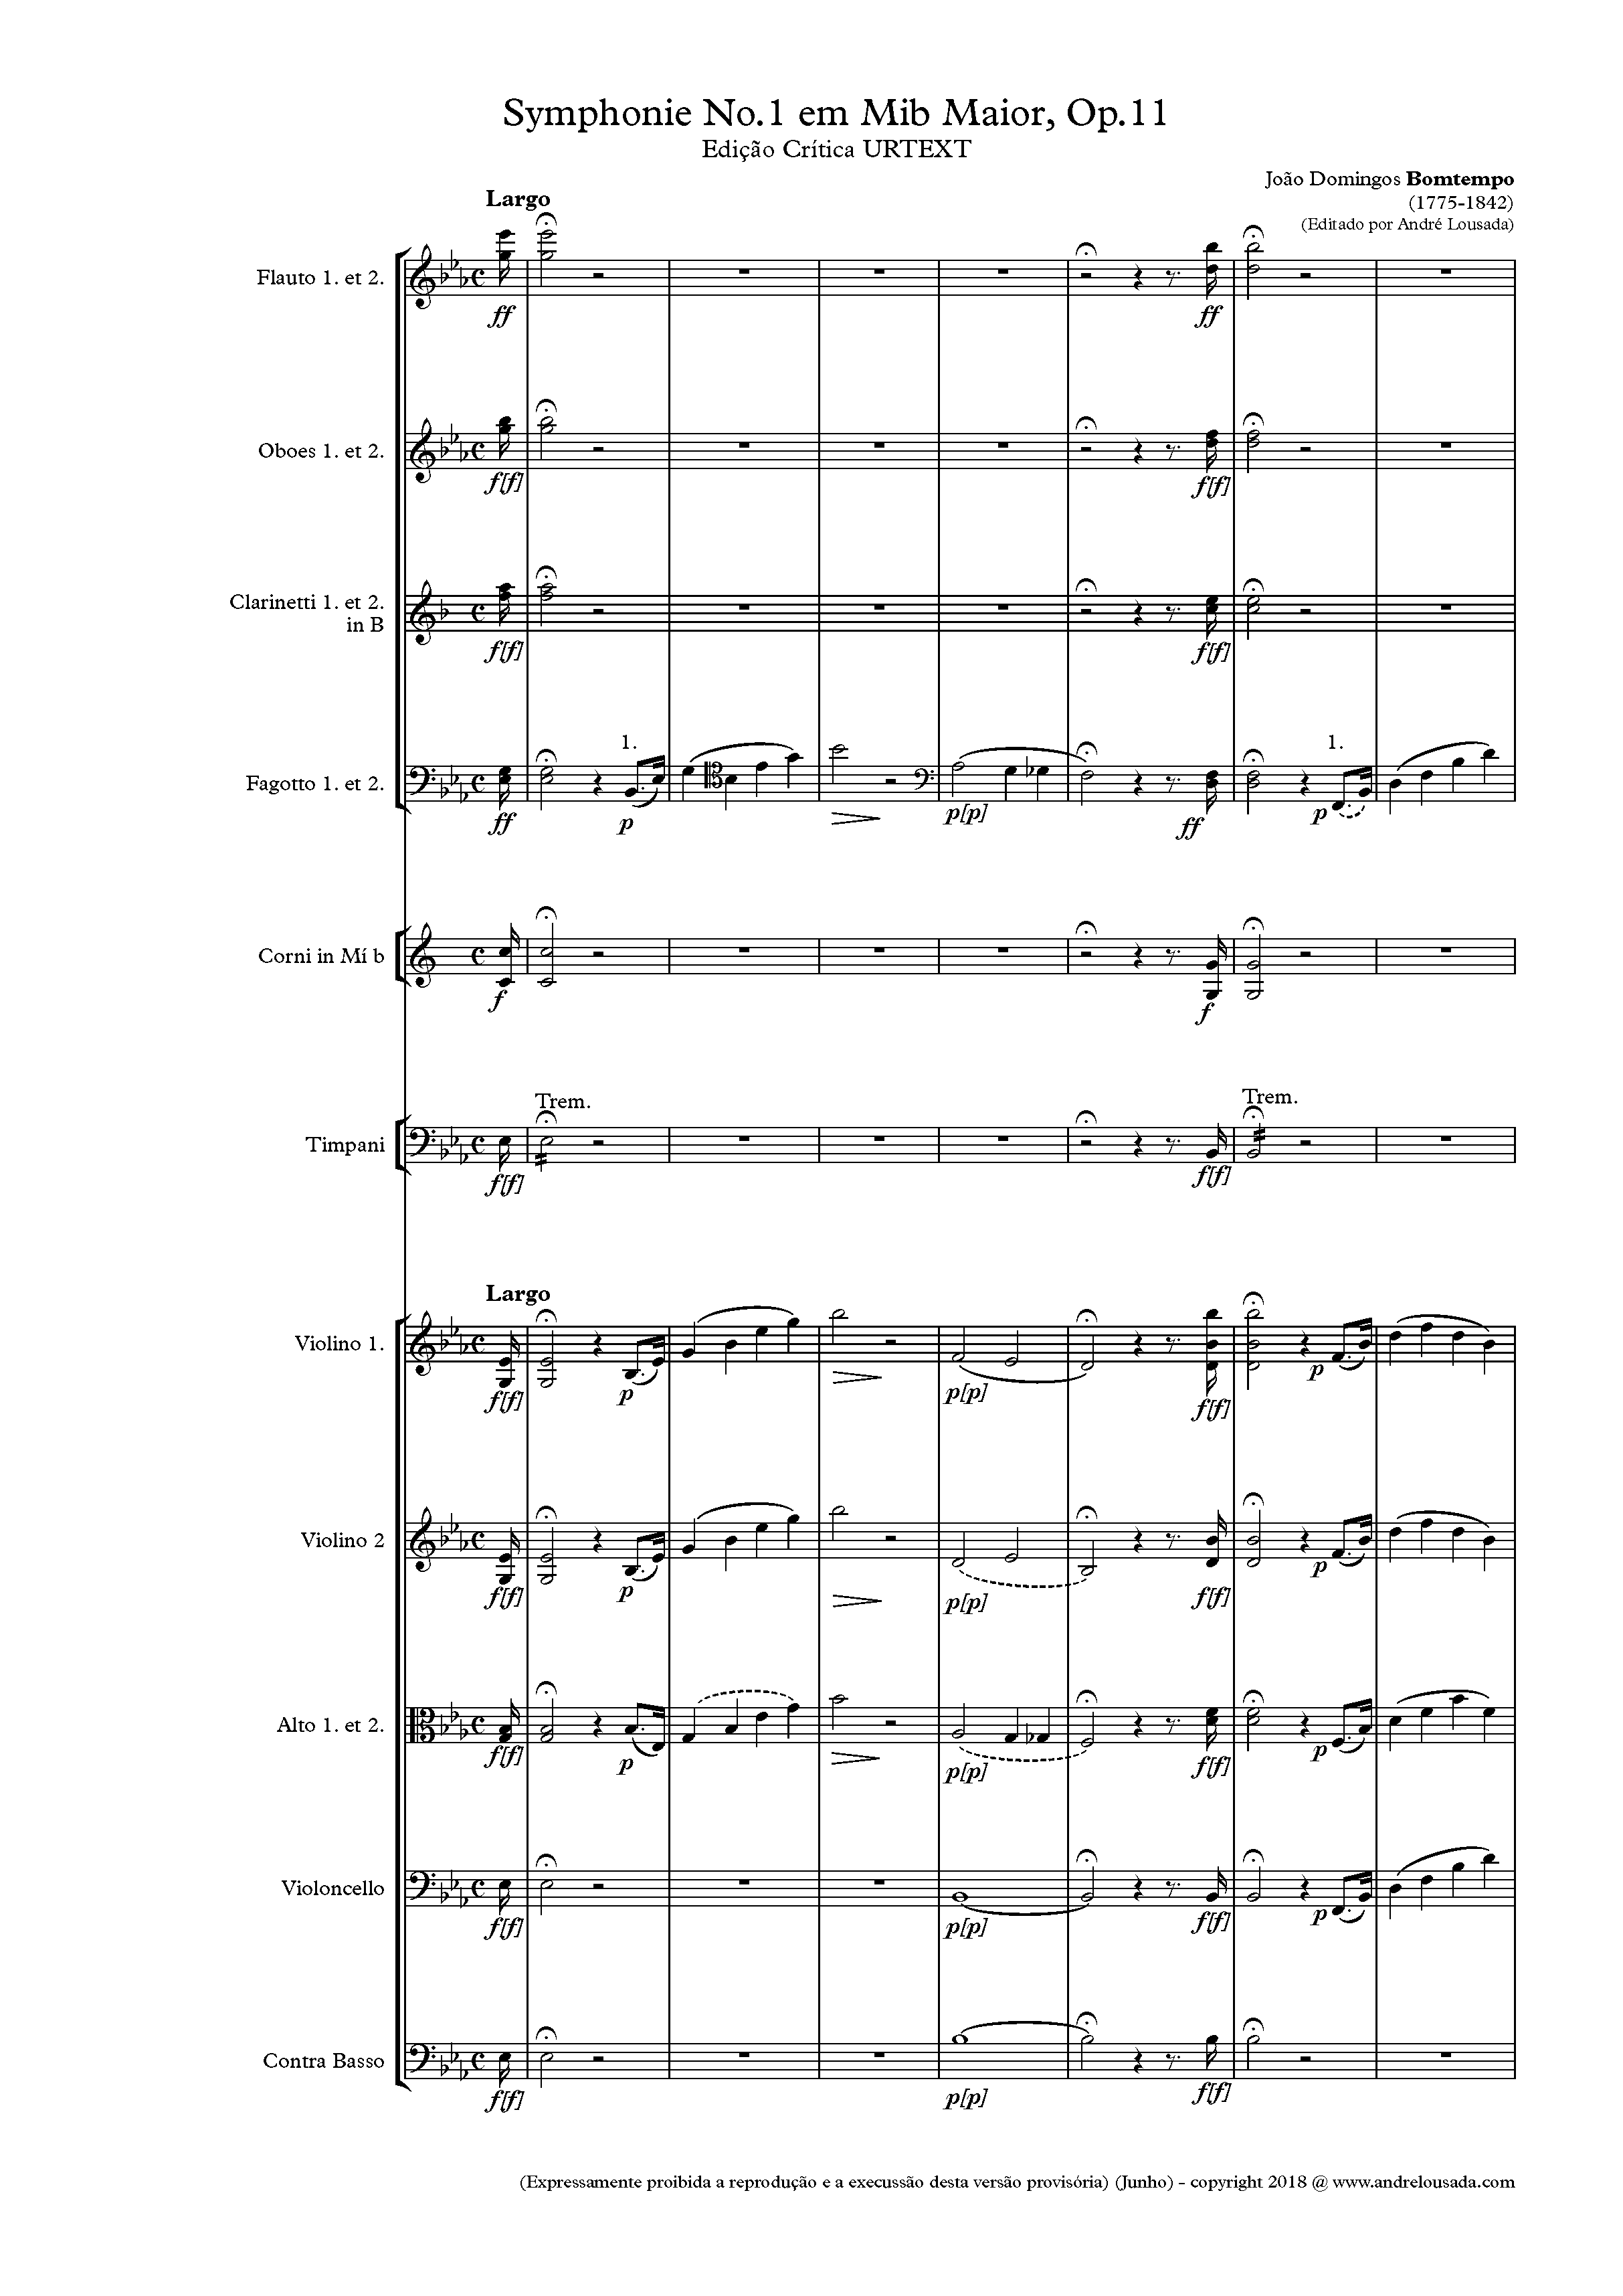 Sinfonia No 1 URTEXT - Page ONE_0001.png